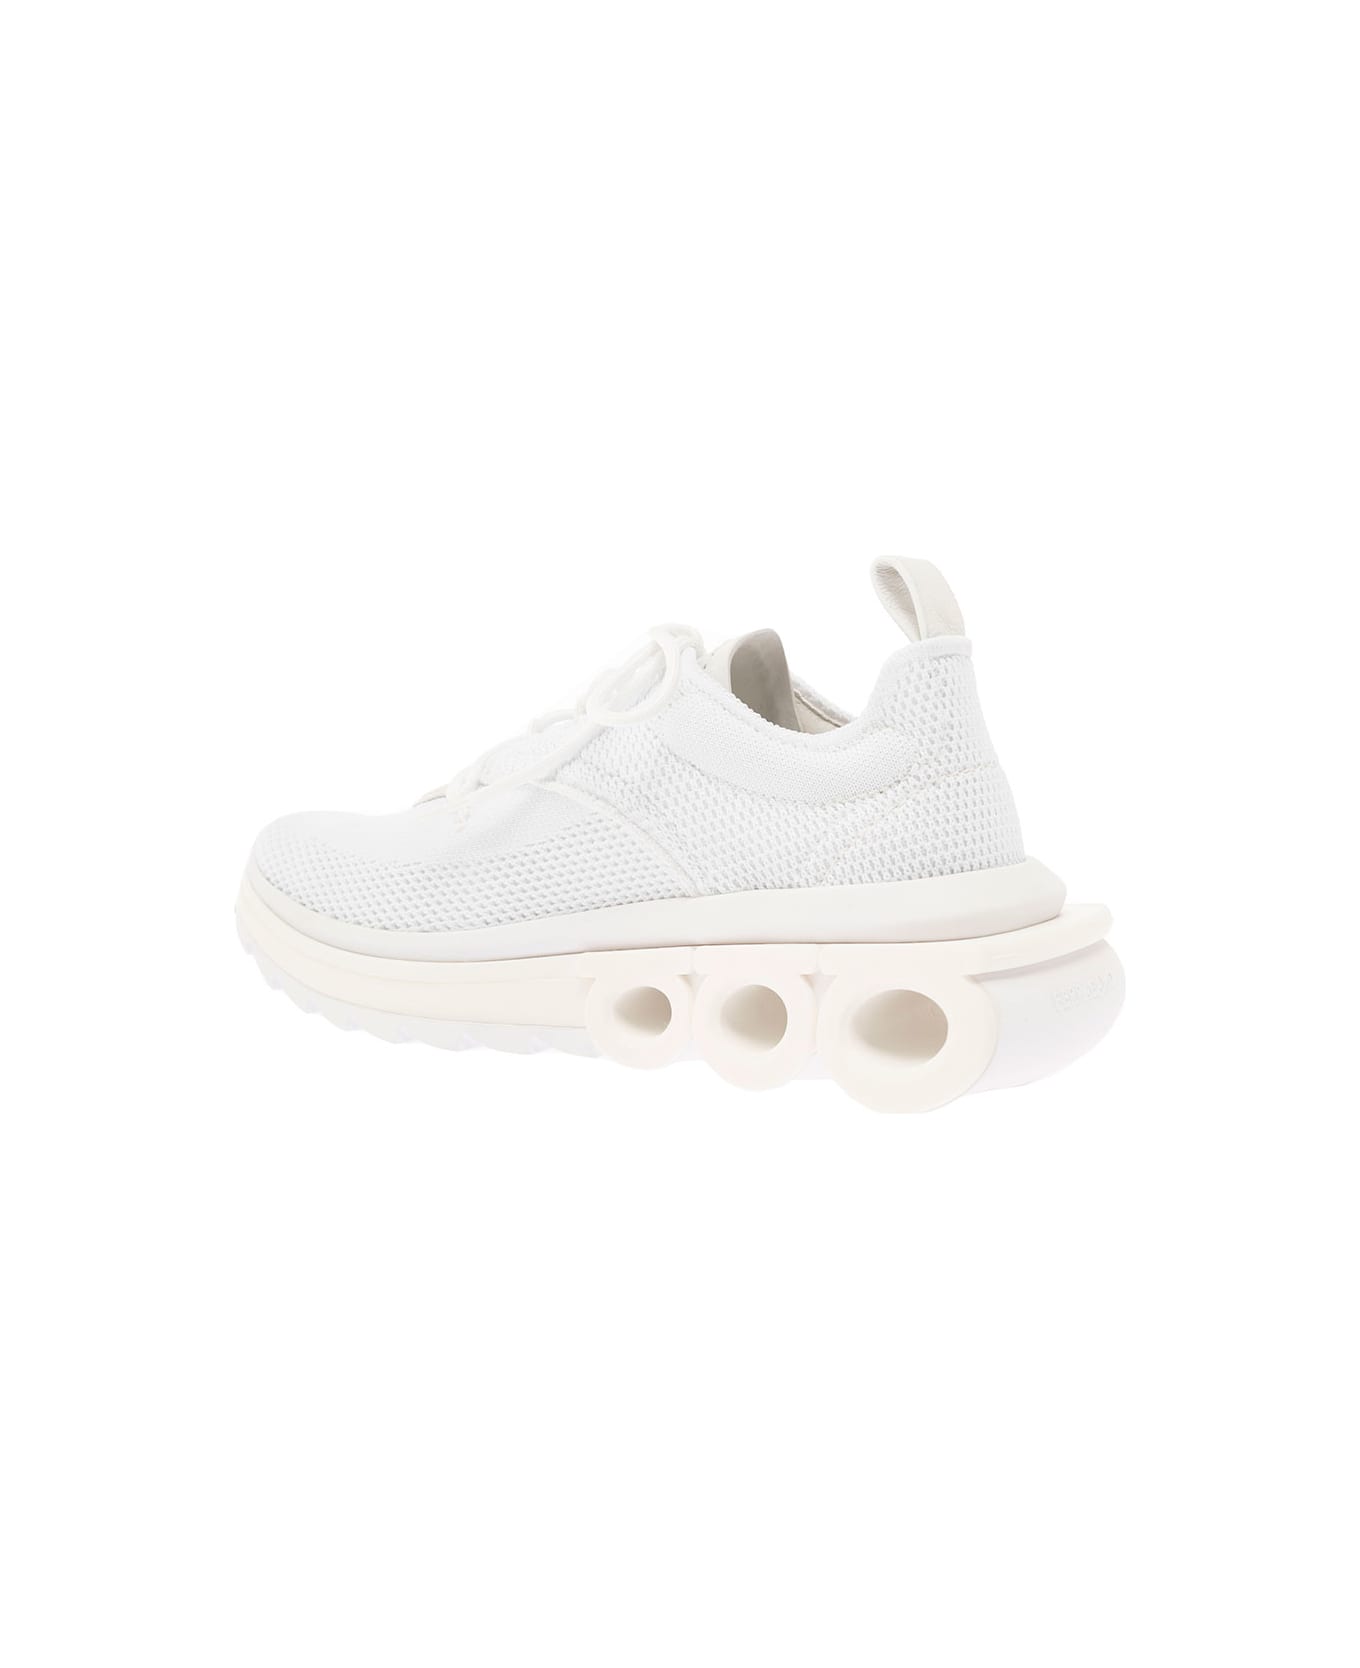 Ferragamo 'nima' White Low Top Sneakers With Gancini Detail In Mixed Materials Woman - White